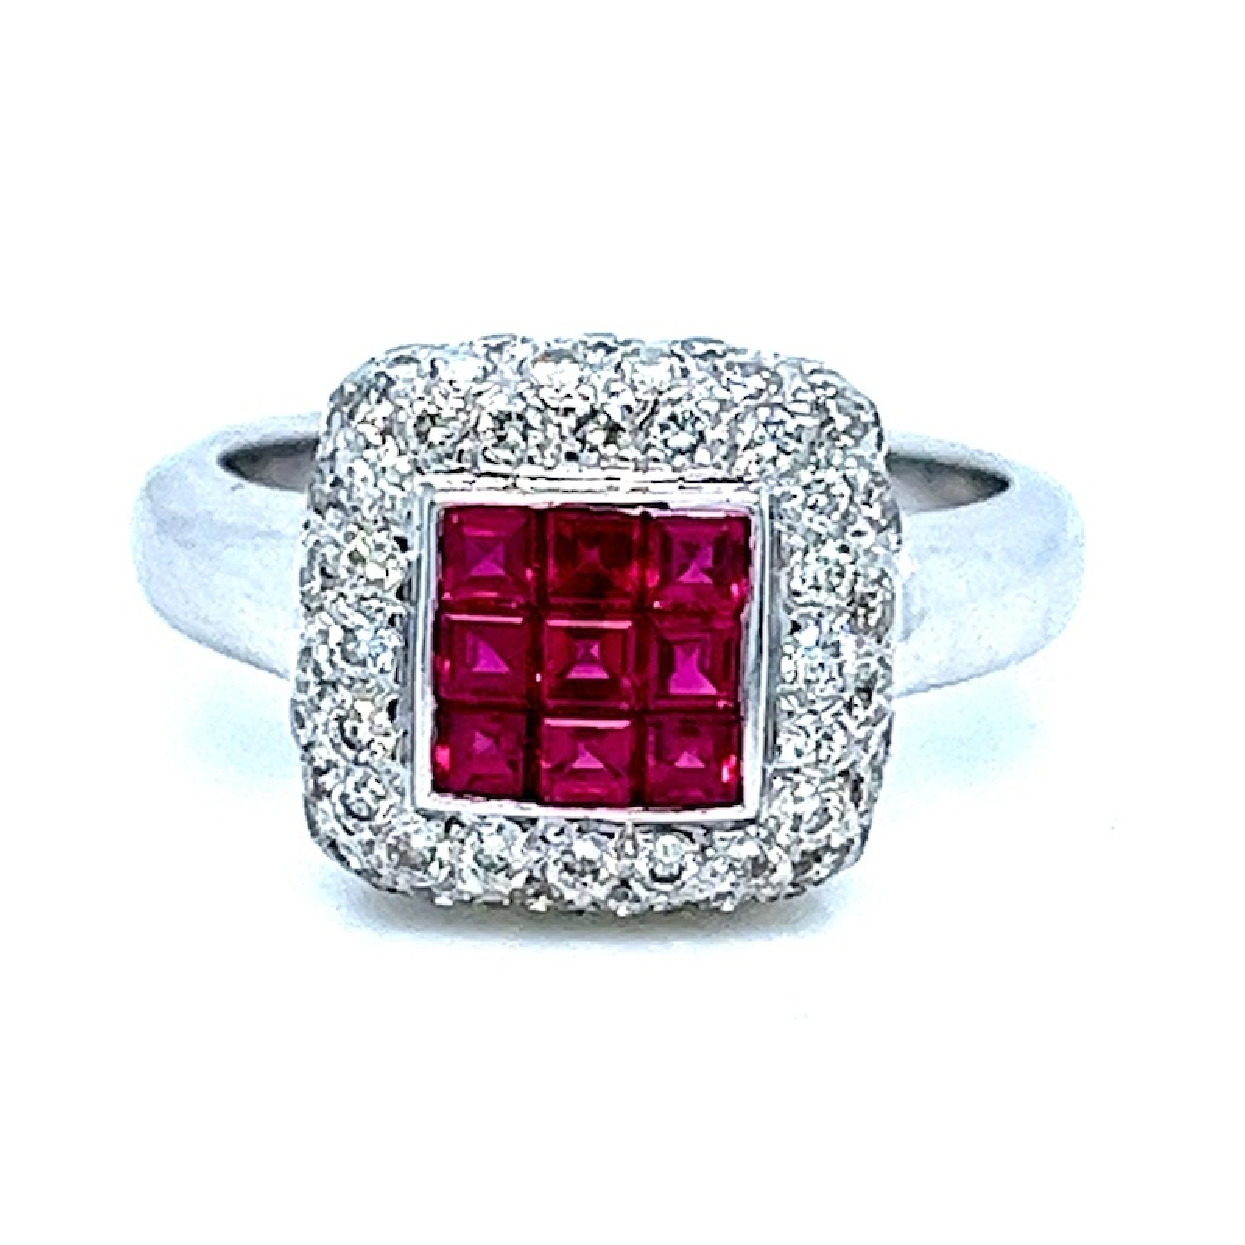 18K White Gold Ring with Square Cut Rubies and Diamond Halo
Size 5.25